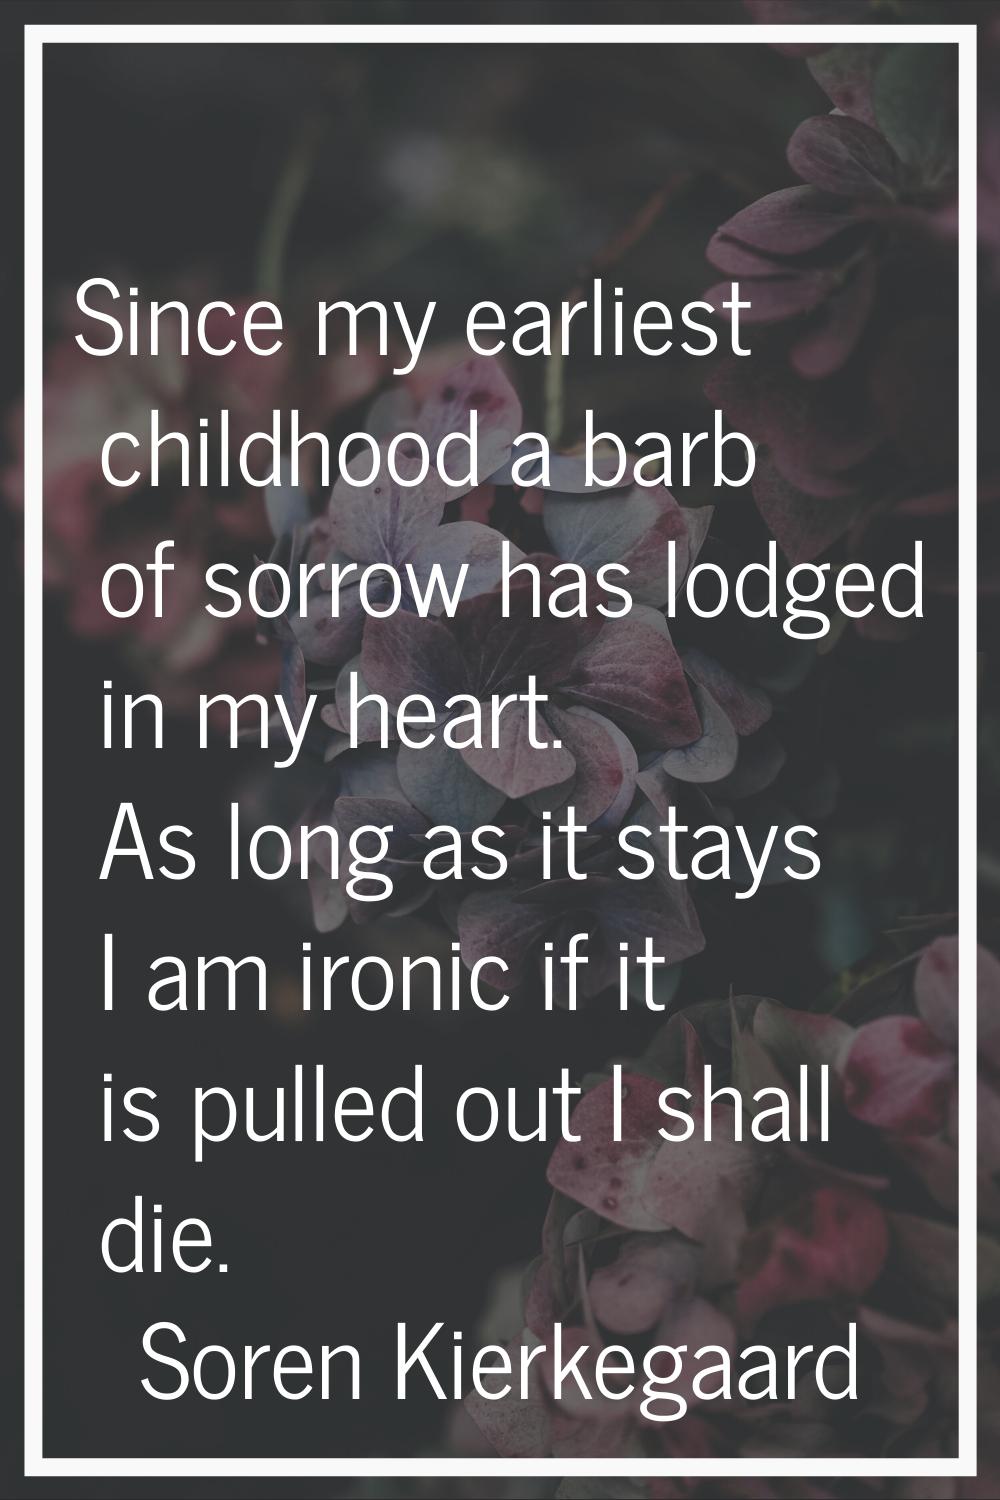 Since my earliest childhood a barb of sorrow has lodged in my heart. As long as it stays I am ironi